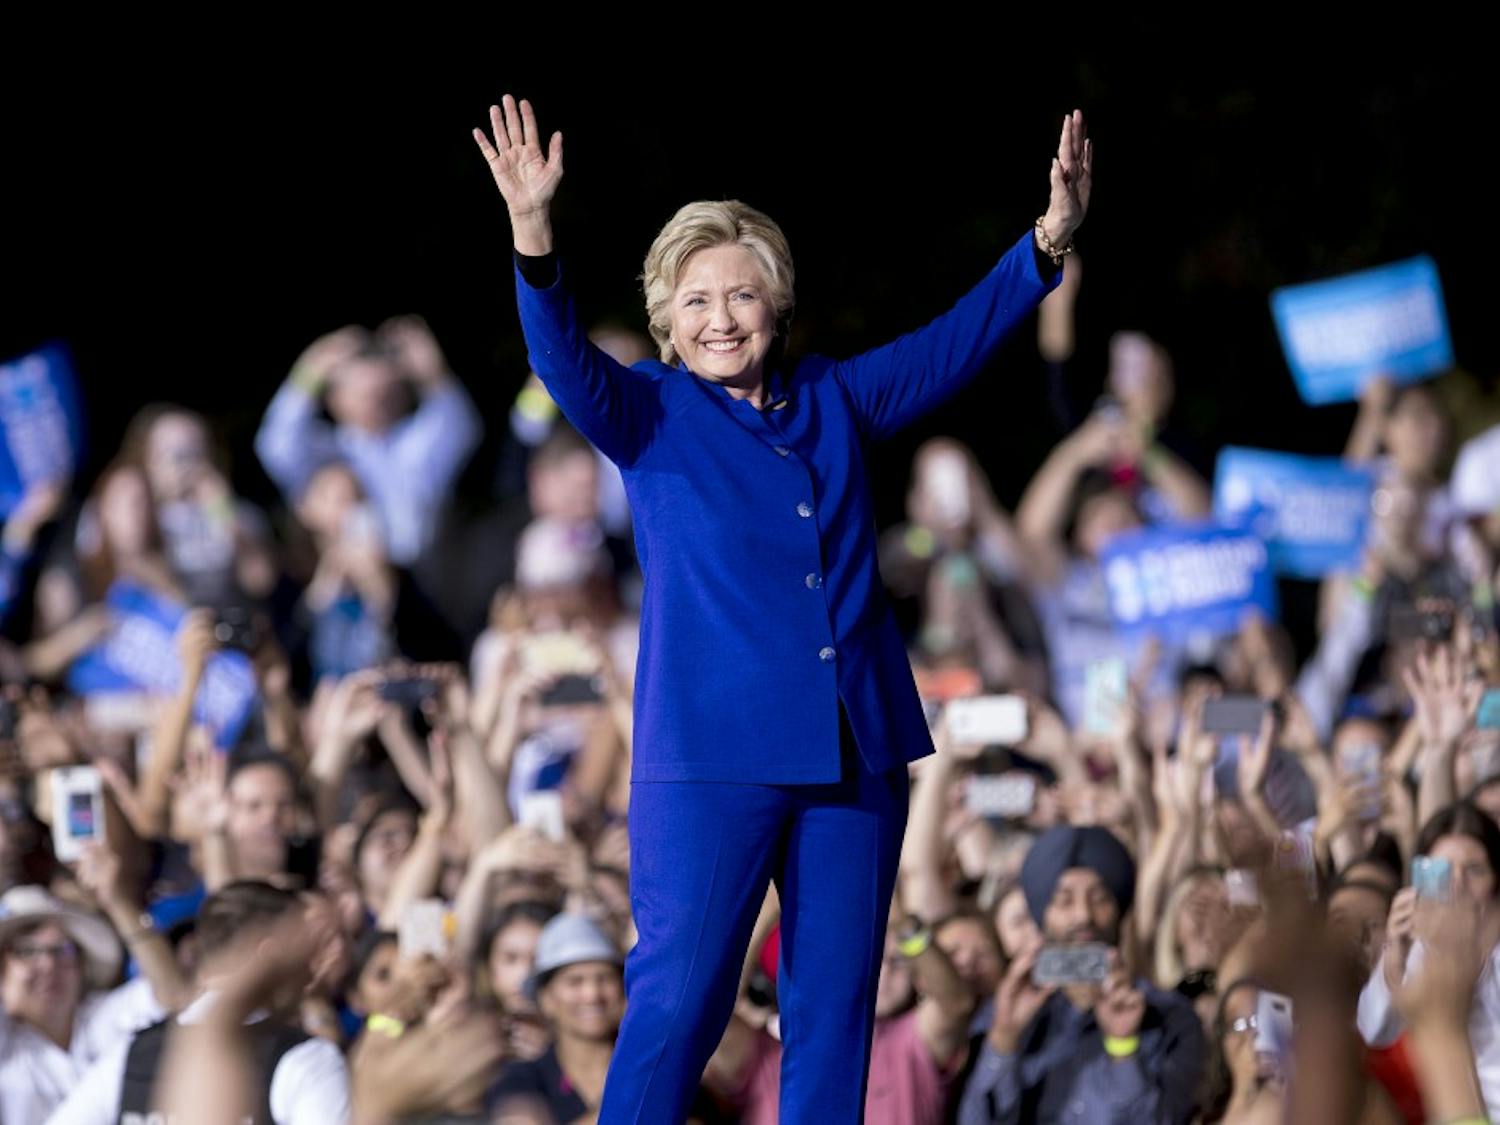 Photo Gallery: Hillary Clinton holds rally at ASU less than one week before election